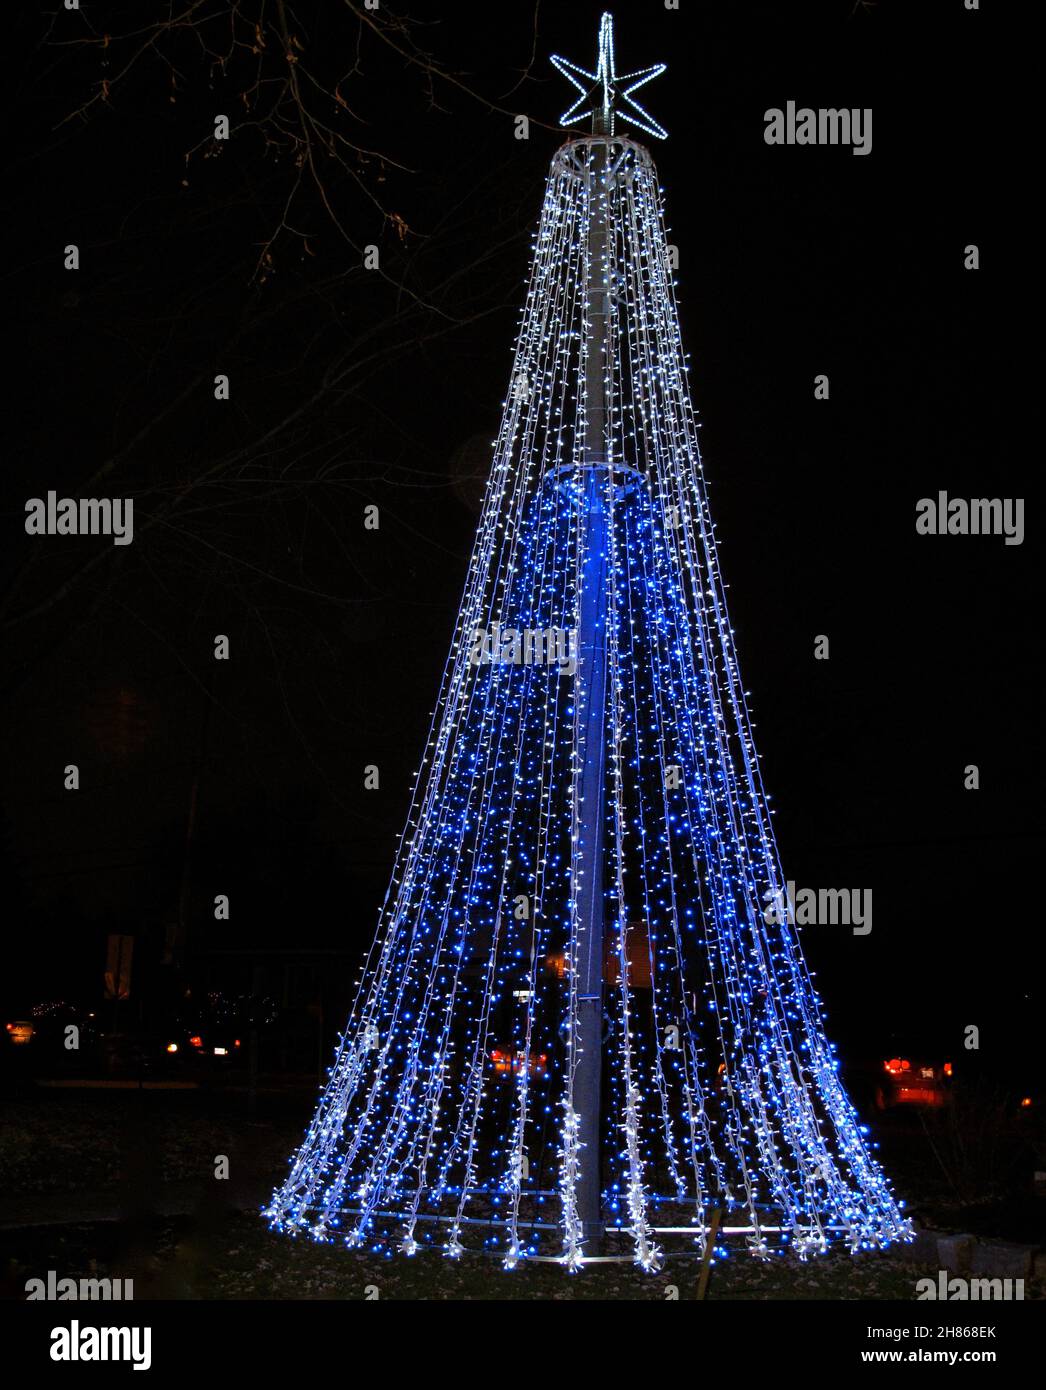 Tall outdoor Christmas tree formed with blue and white string of lights Stock Photo